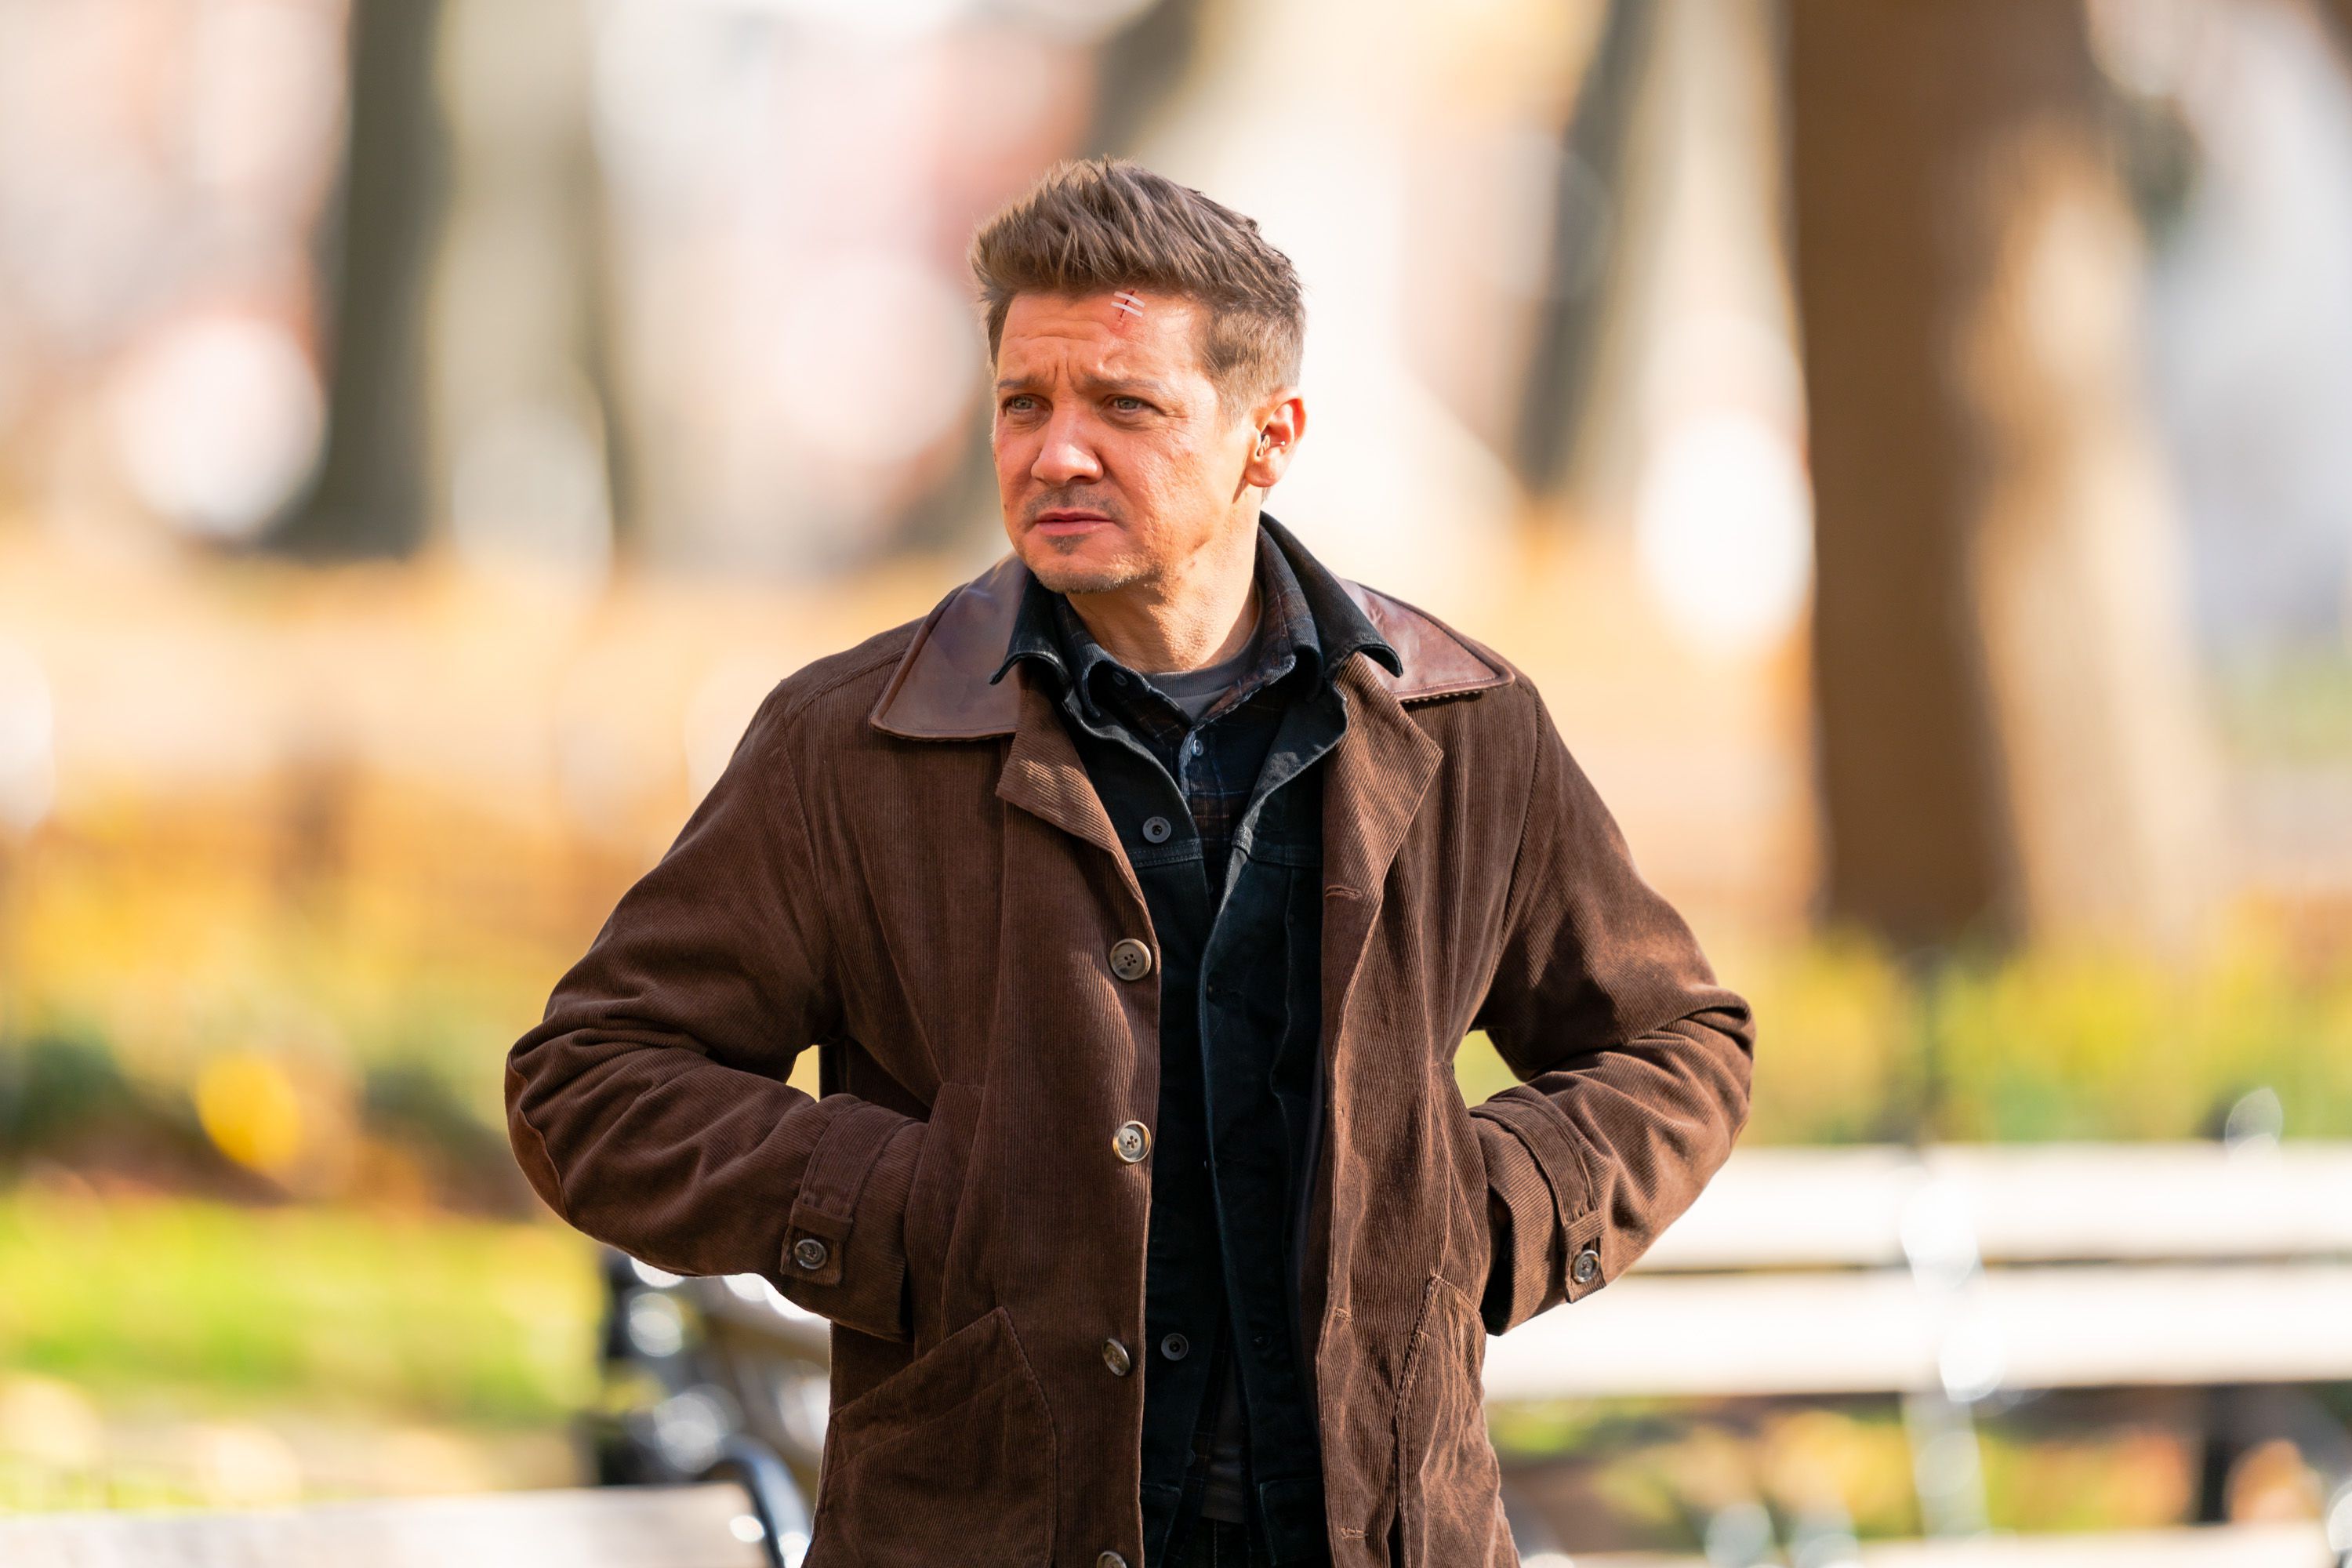 Jeremy Renner is seen filming "Hawkeye" in Washington Square Park, on December 3, 2020, in New York City. | Source: Getty Images